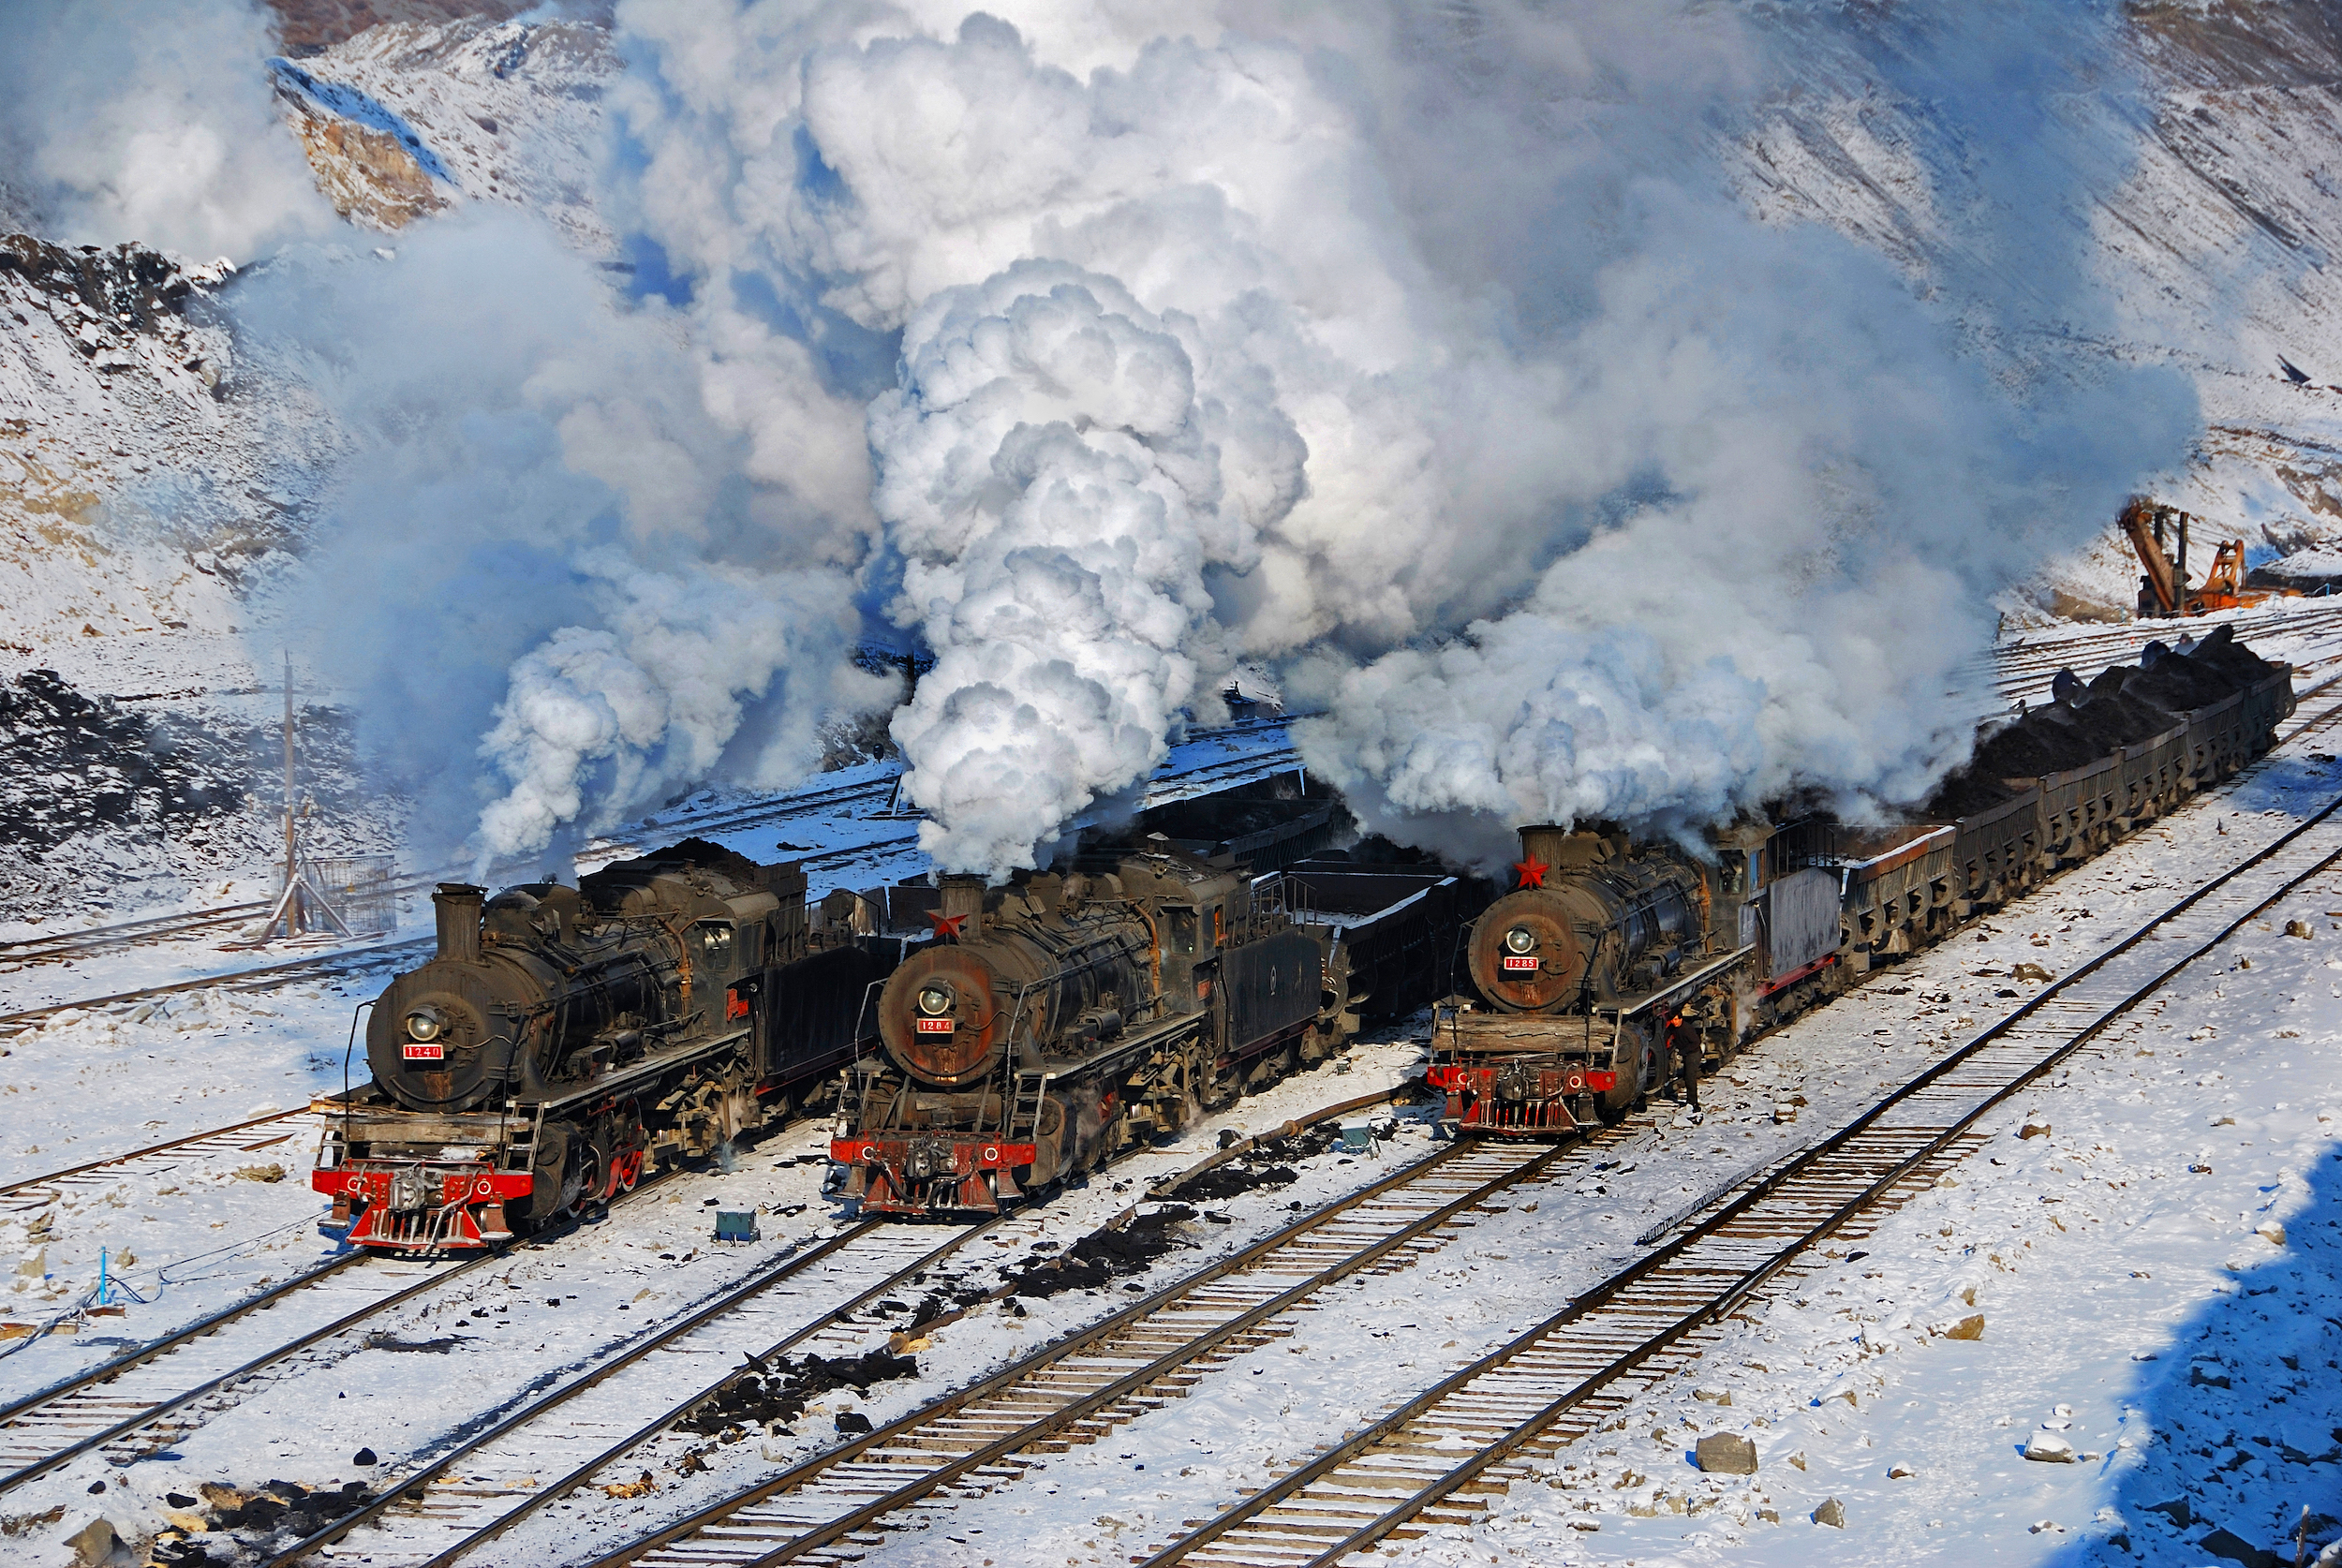 Three steam locomotives next to each other in the snow